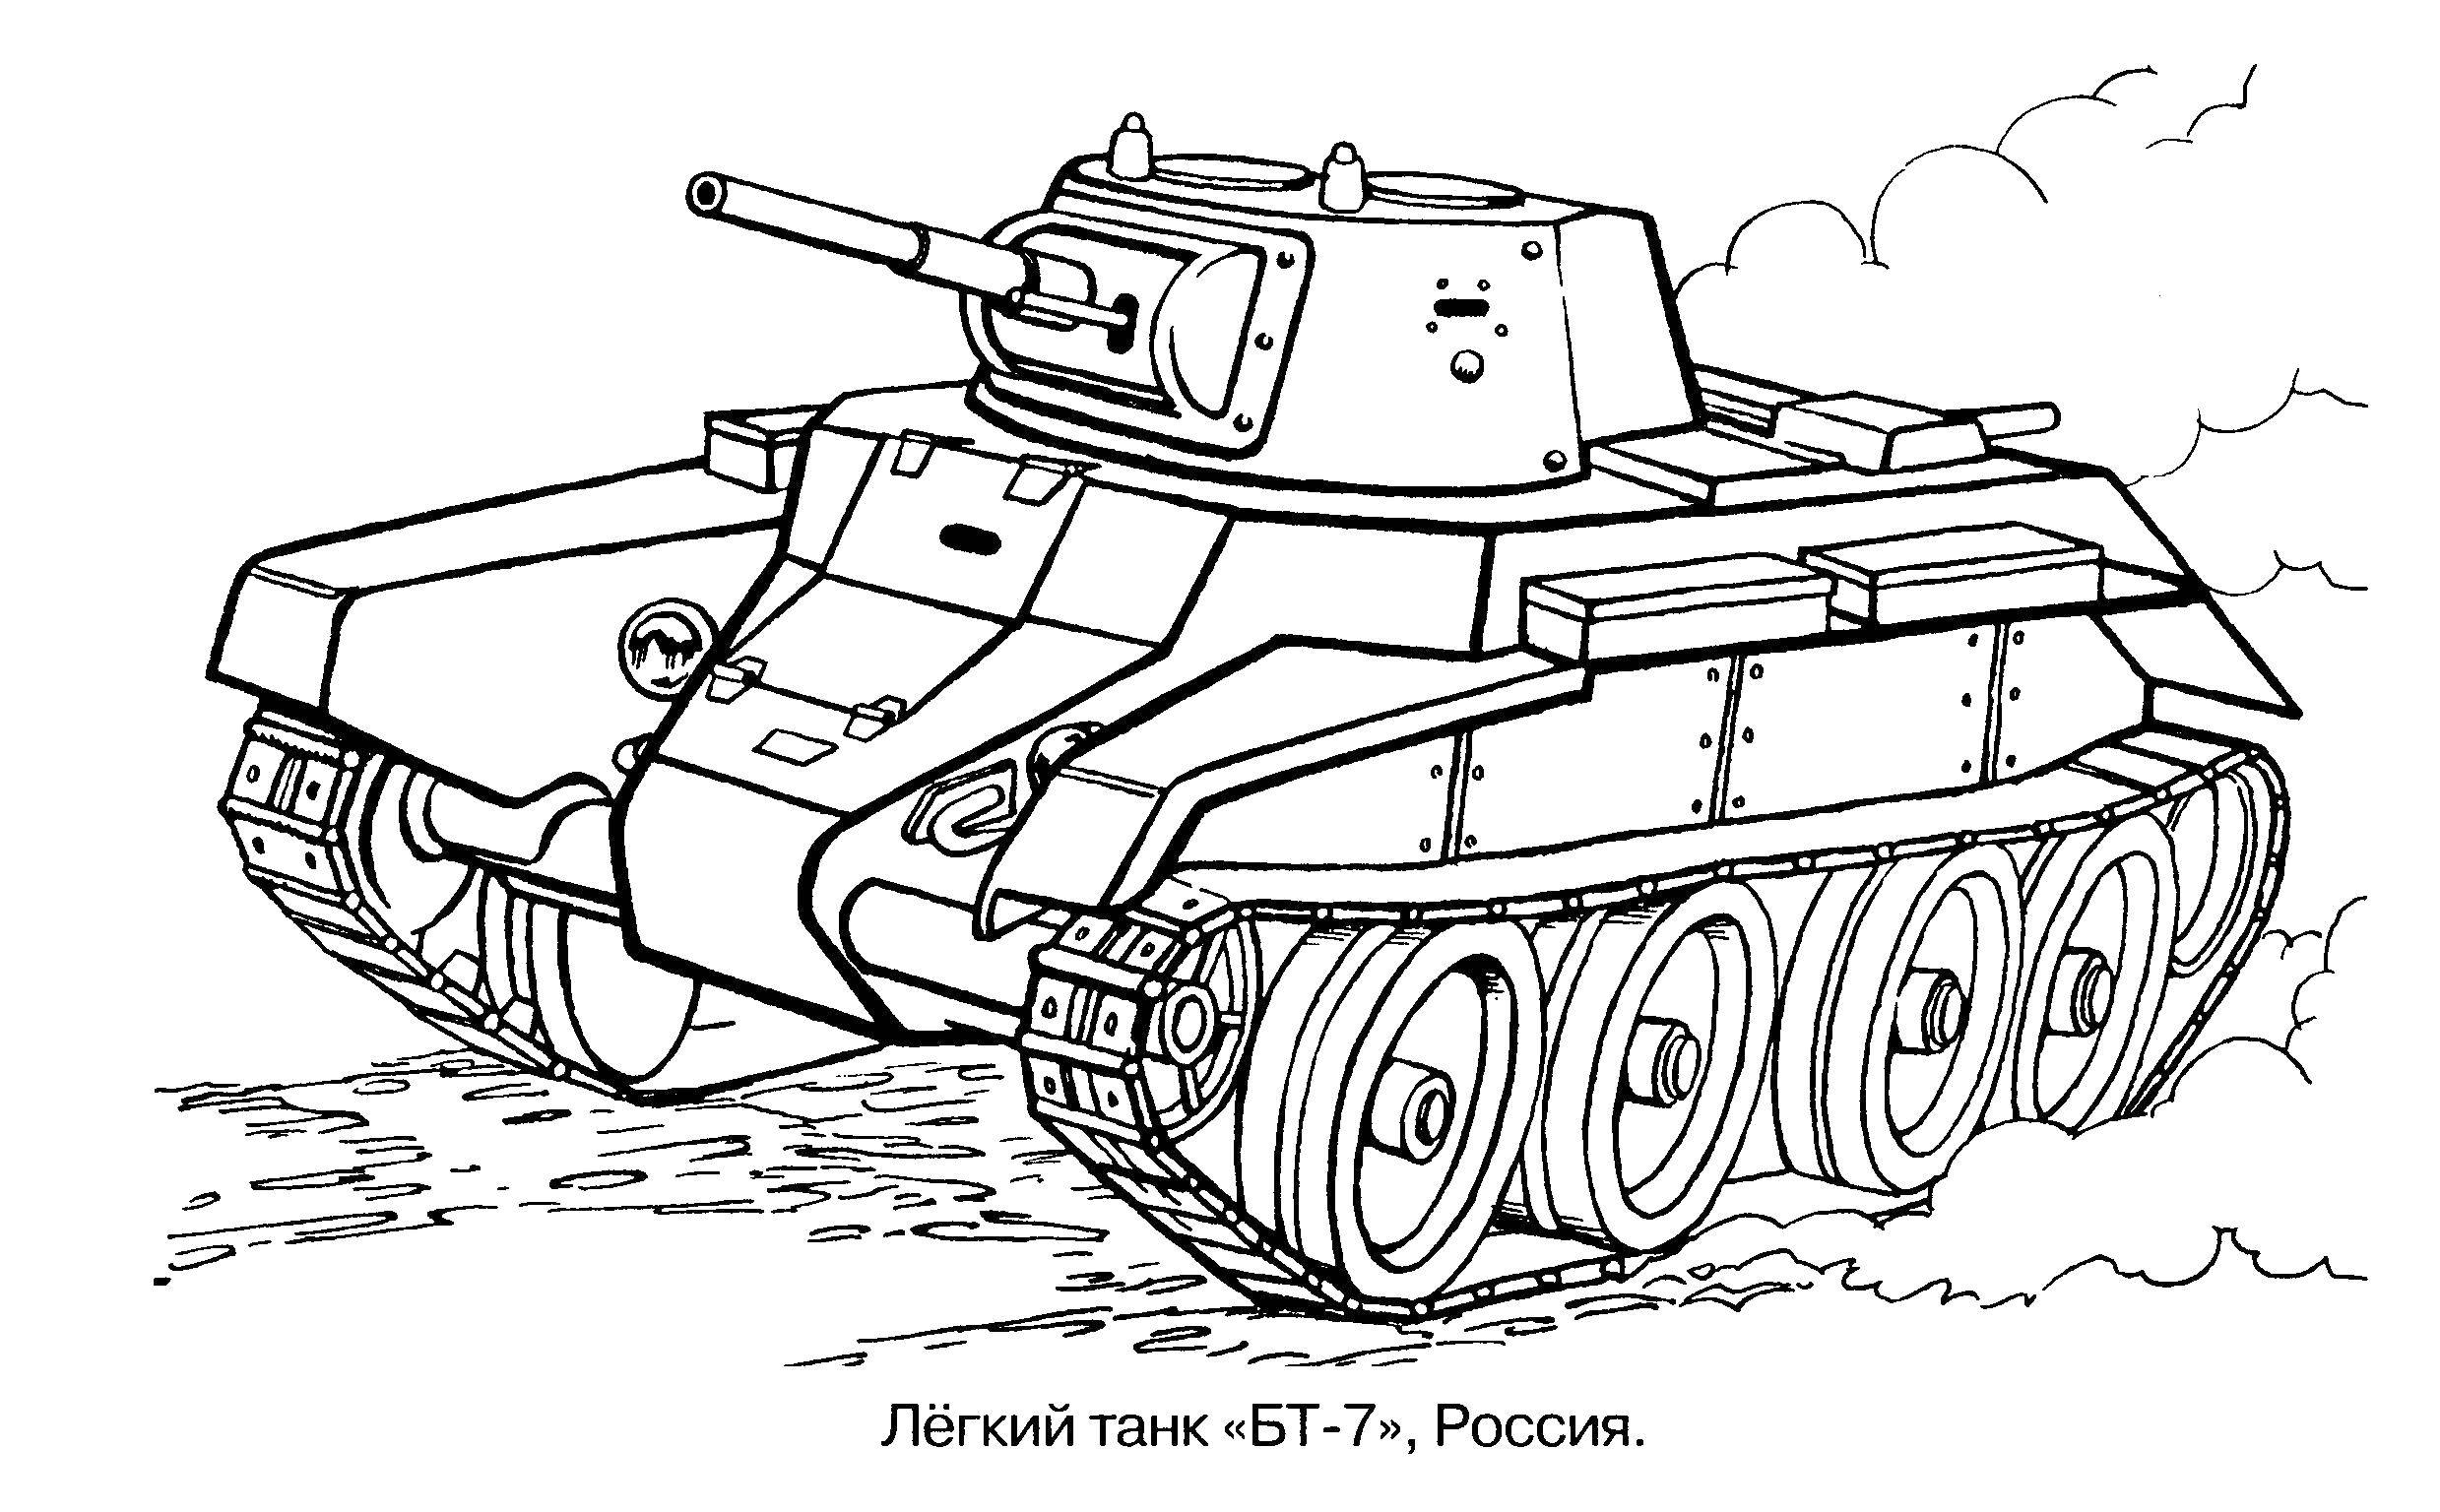 Coloring Light tank BT-7 . Category military coloring pages. Tags:  Tank, transportation, machinery, military.